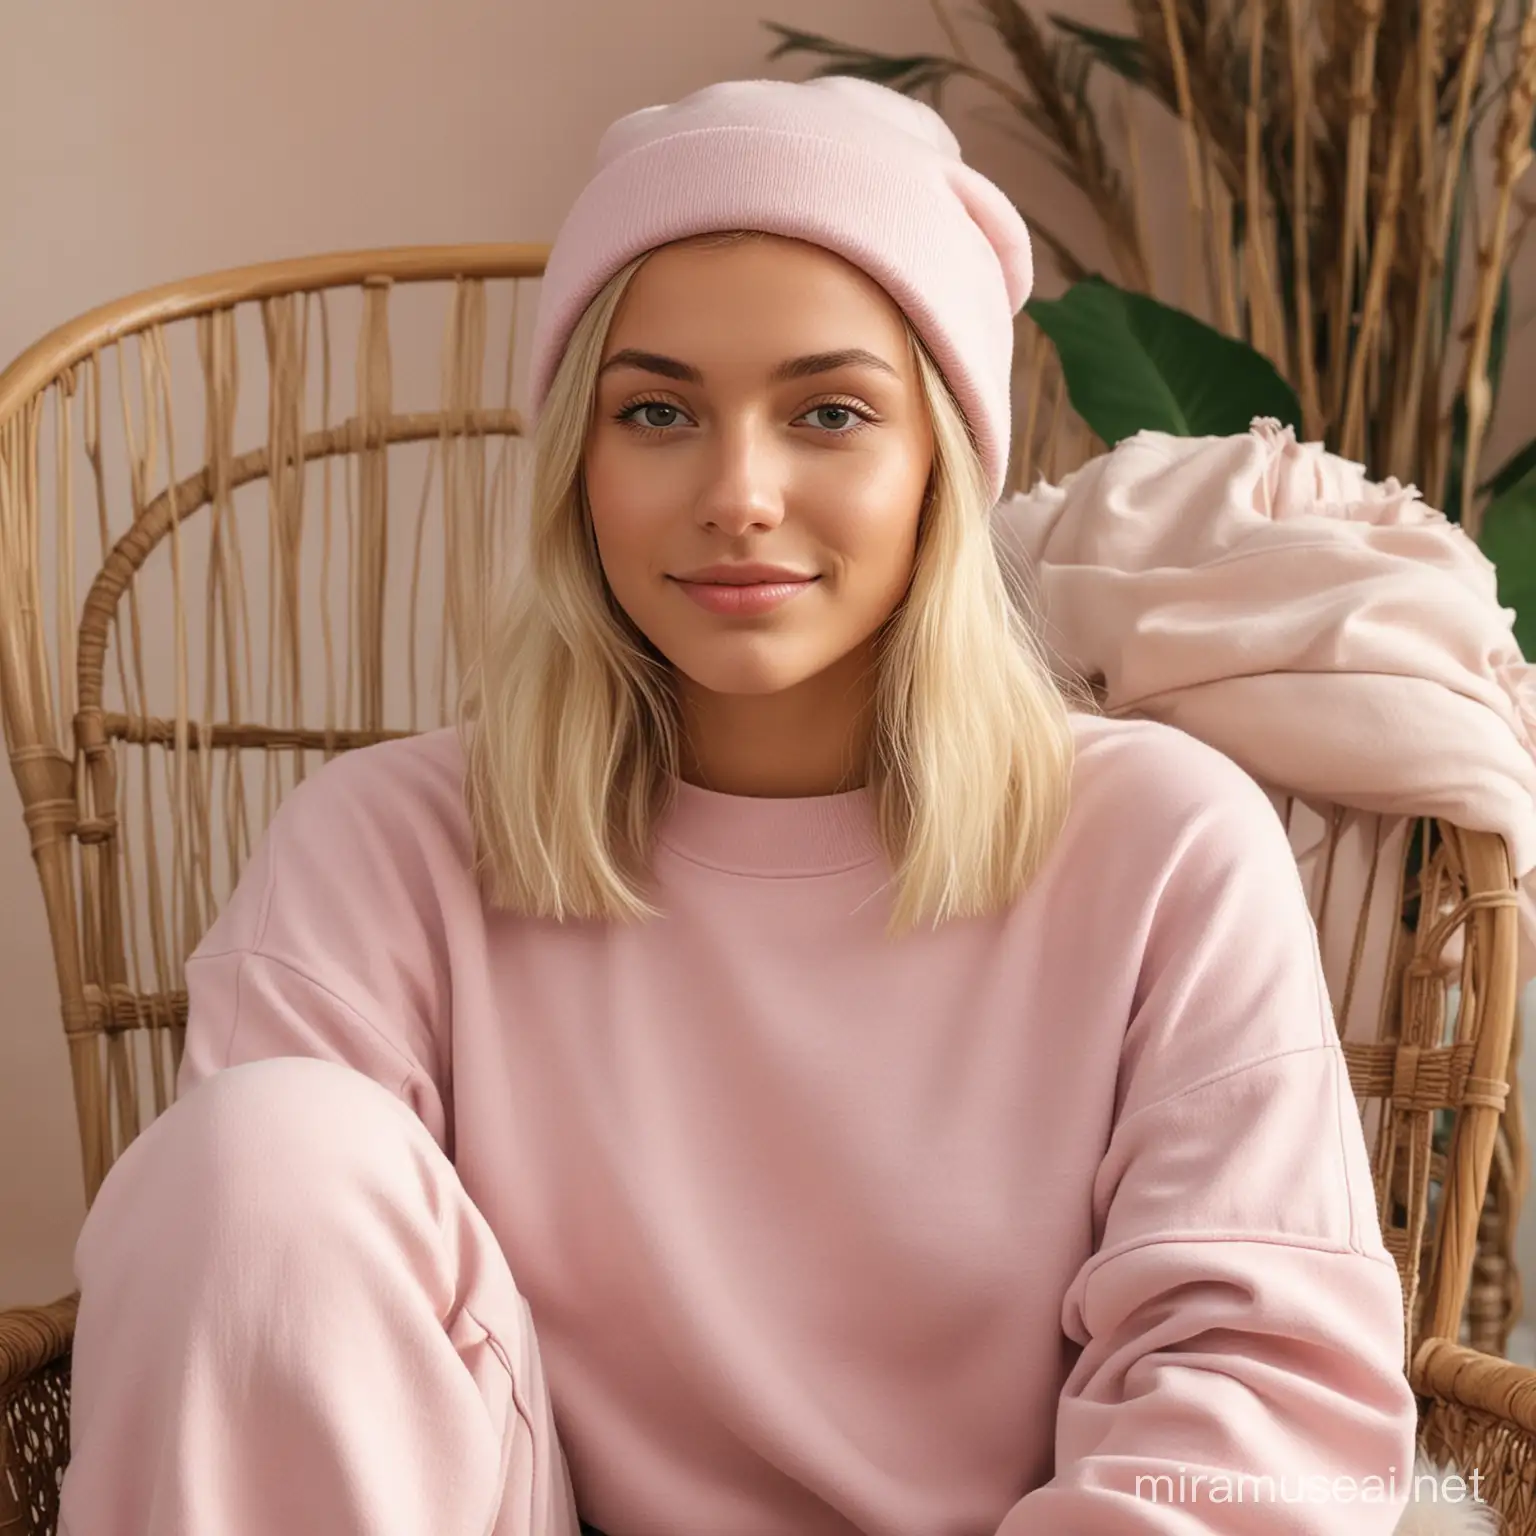 young women, with blond hair over her shoulders, wearing a light pink crewneck sweatshirt, boho background, sitting down on a chair, facing the camera, no wrinkles on the front of the sweatshirt, wearing a winter hat